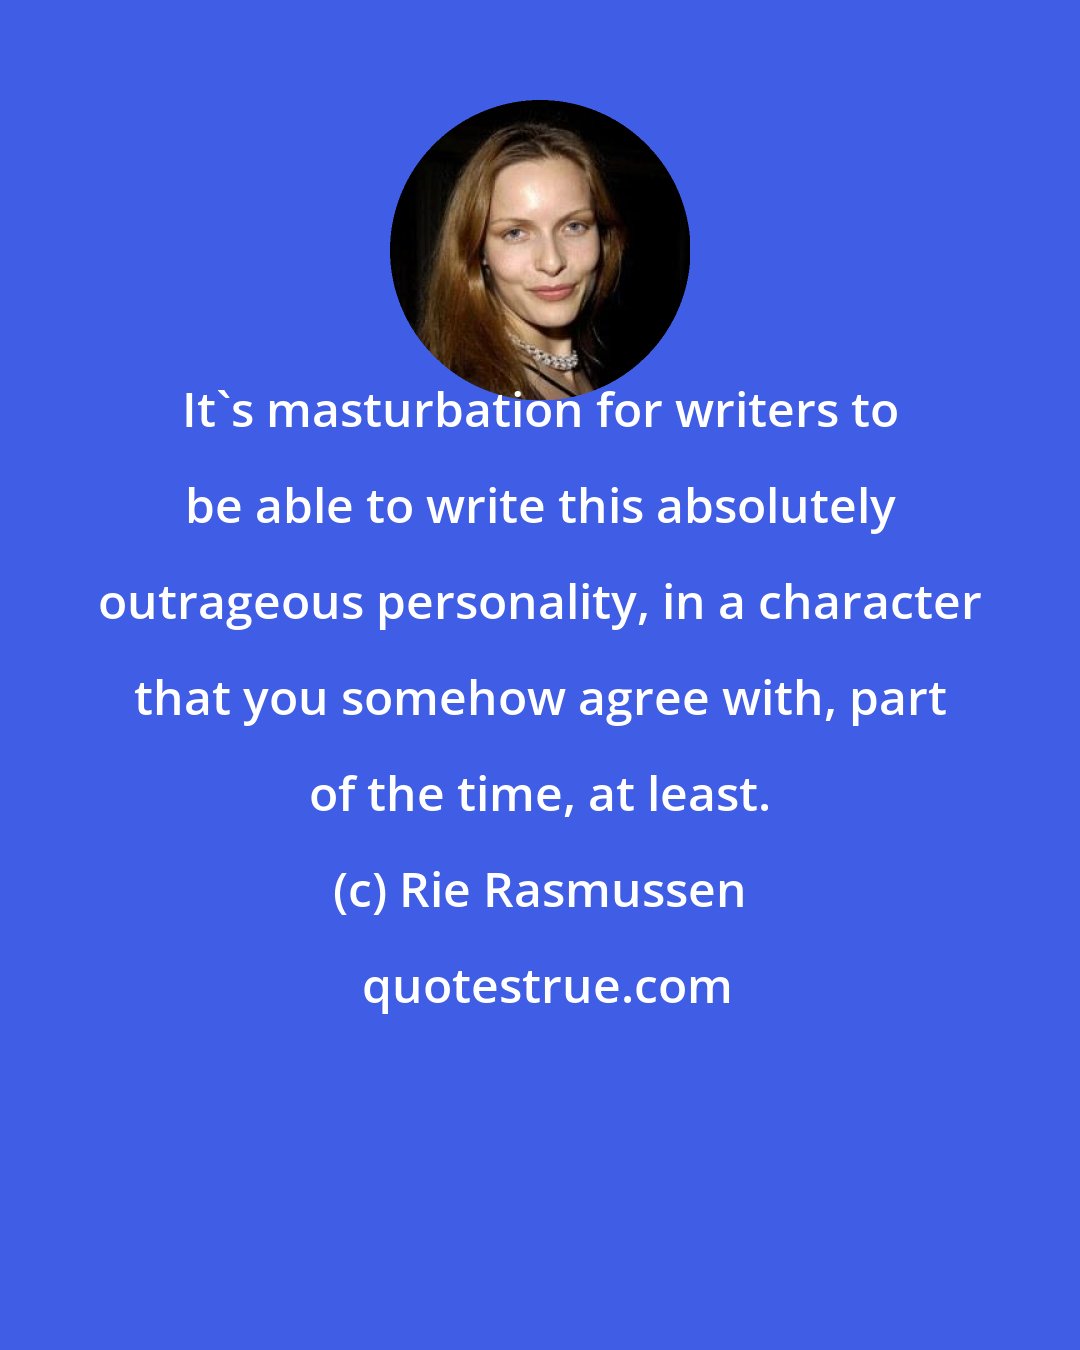 Rie Rasmussen: It's masturbation for writers to be able to write this absolutely outrageous personality, in a character that you somehow agree with, part of the time, at least.